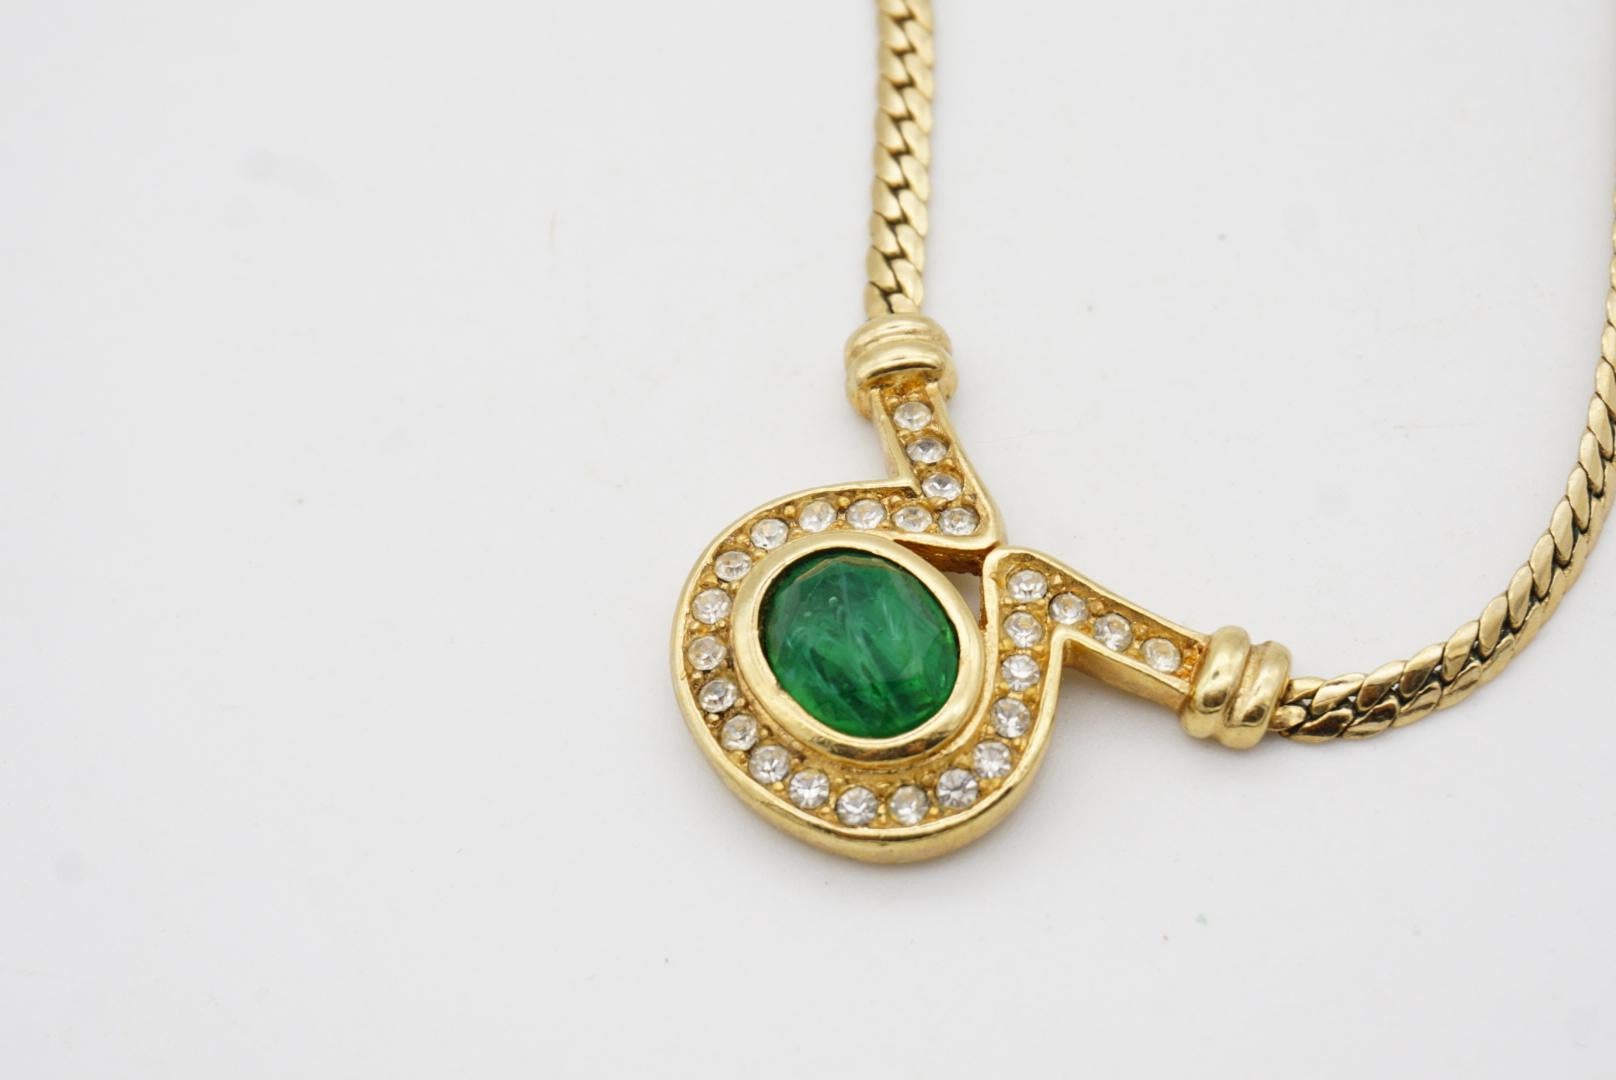 Christian Dior Vintage 1980s Emerald Green Gripoix Oval Pendant Crystal Necklace For Sale 5